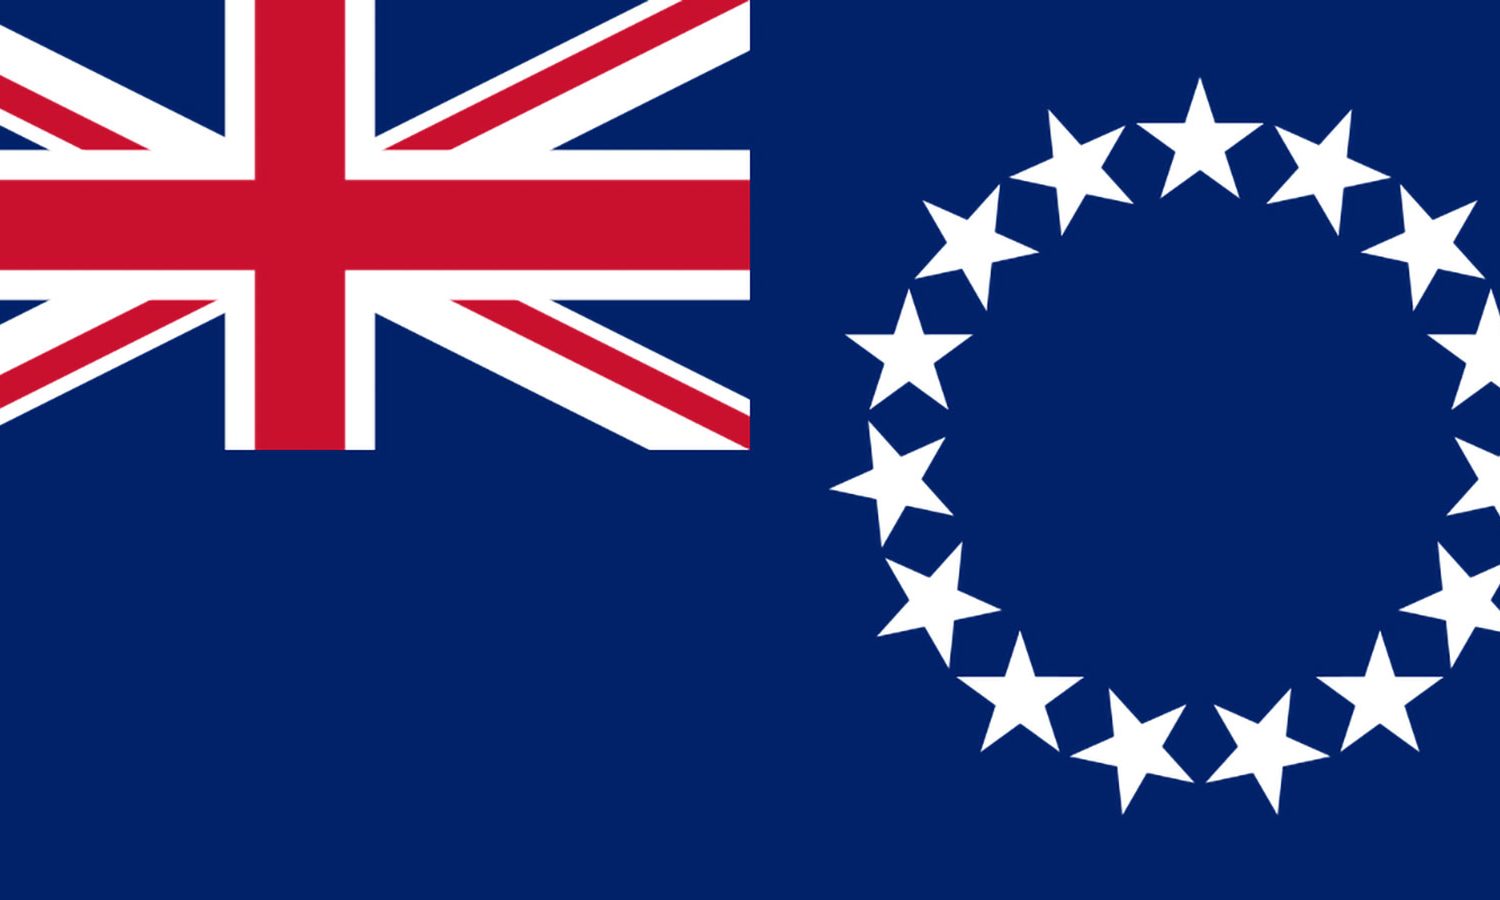 Flag_of_the_Cook_Islands